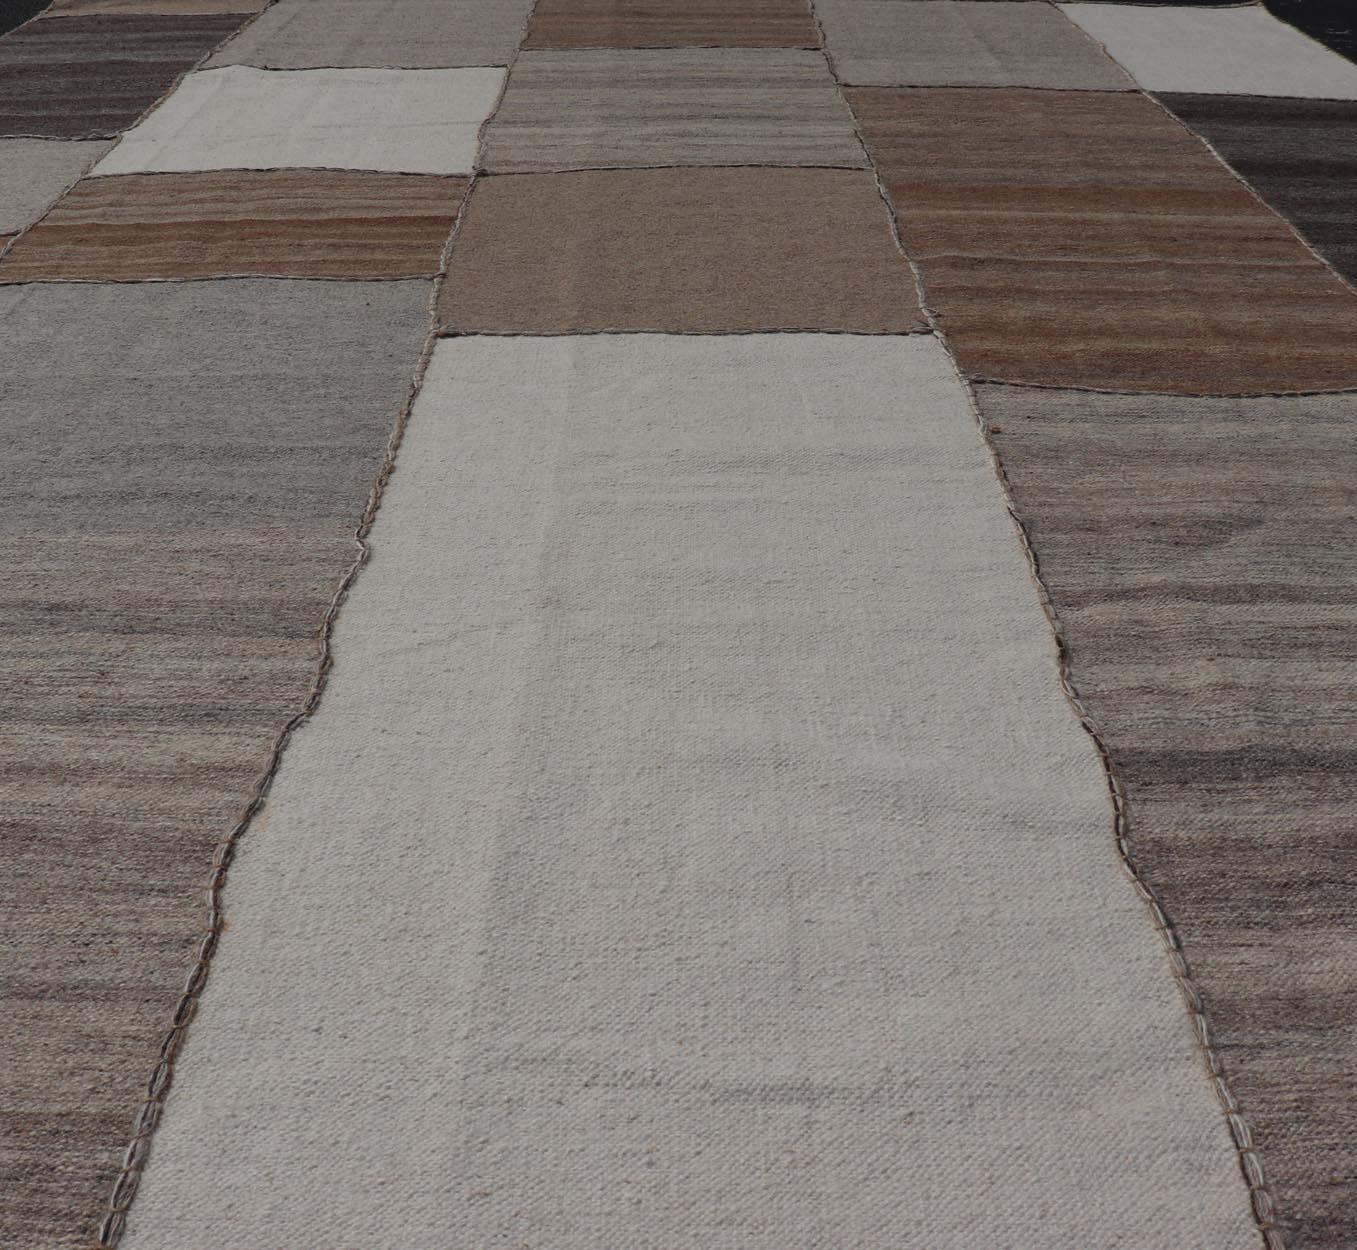 Indian Modern Kilim Rug in Multi-Panel Striped Design with Brown, Gray, White and Taupe For Sale